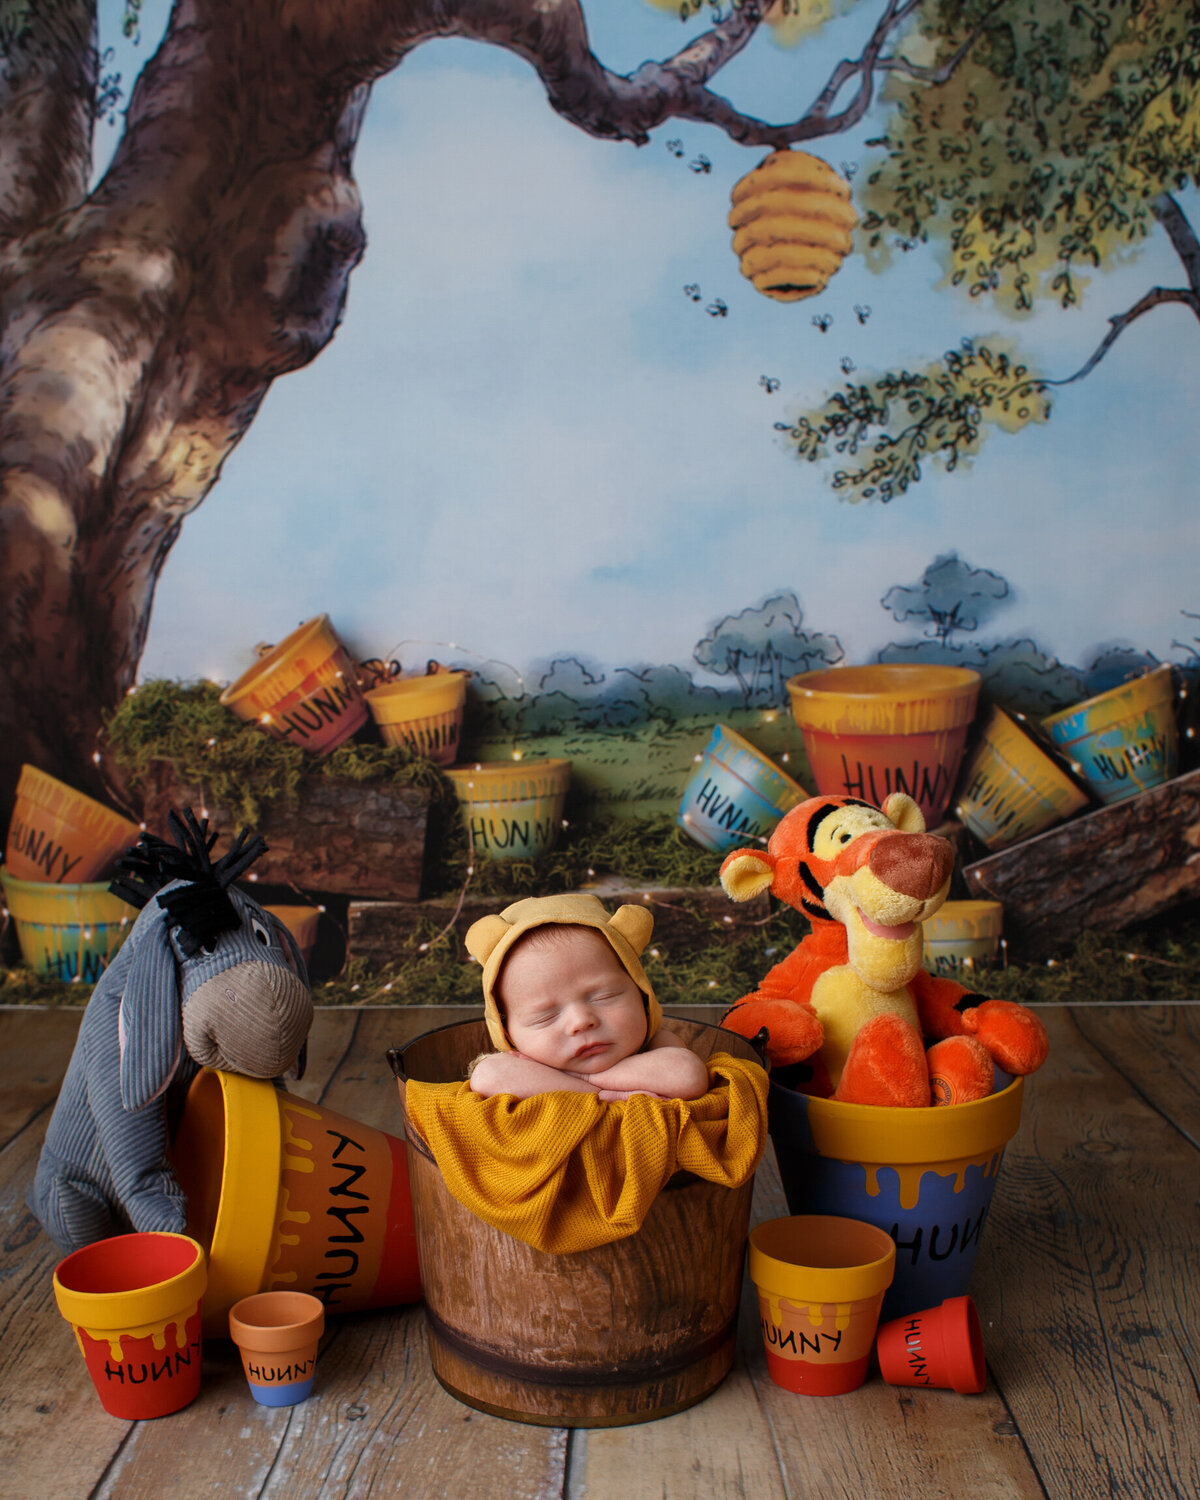 Photo of a newborn in a  basket wearing  in a basket wetween a  Winnie the Phoo characters and wearing a knit cap with little bear ears